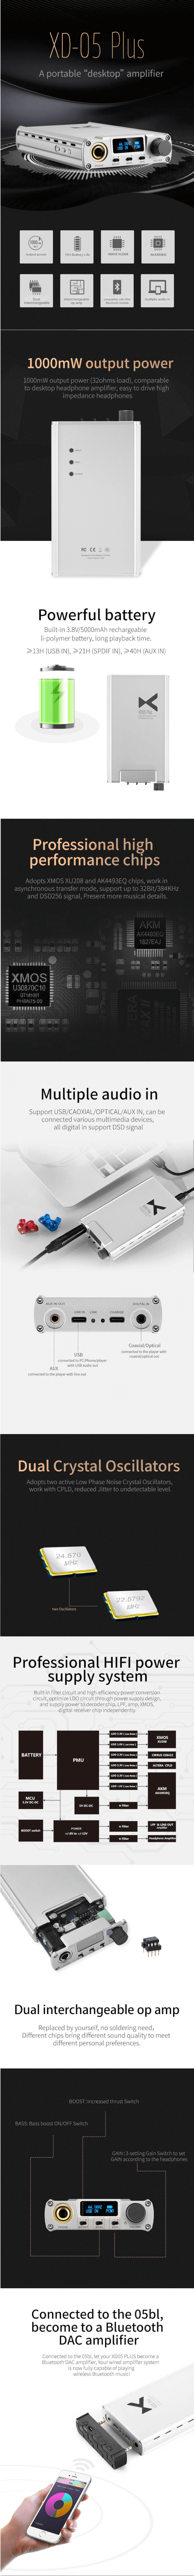 xDuoo XD-05 Plus desktop headphone AMP DAC is available in India at hifinage with manufacturer warranty